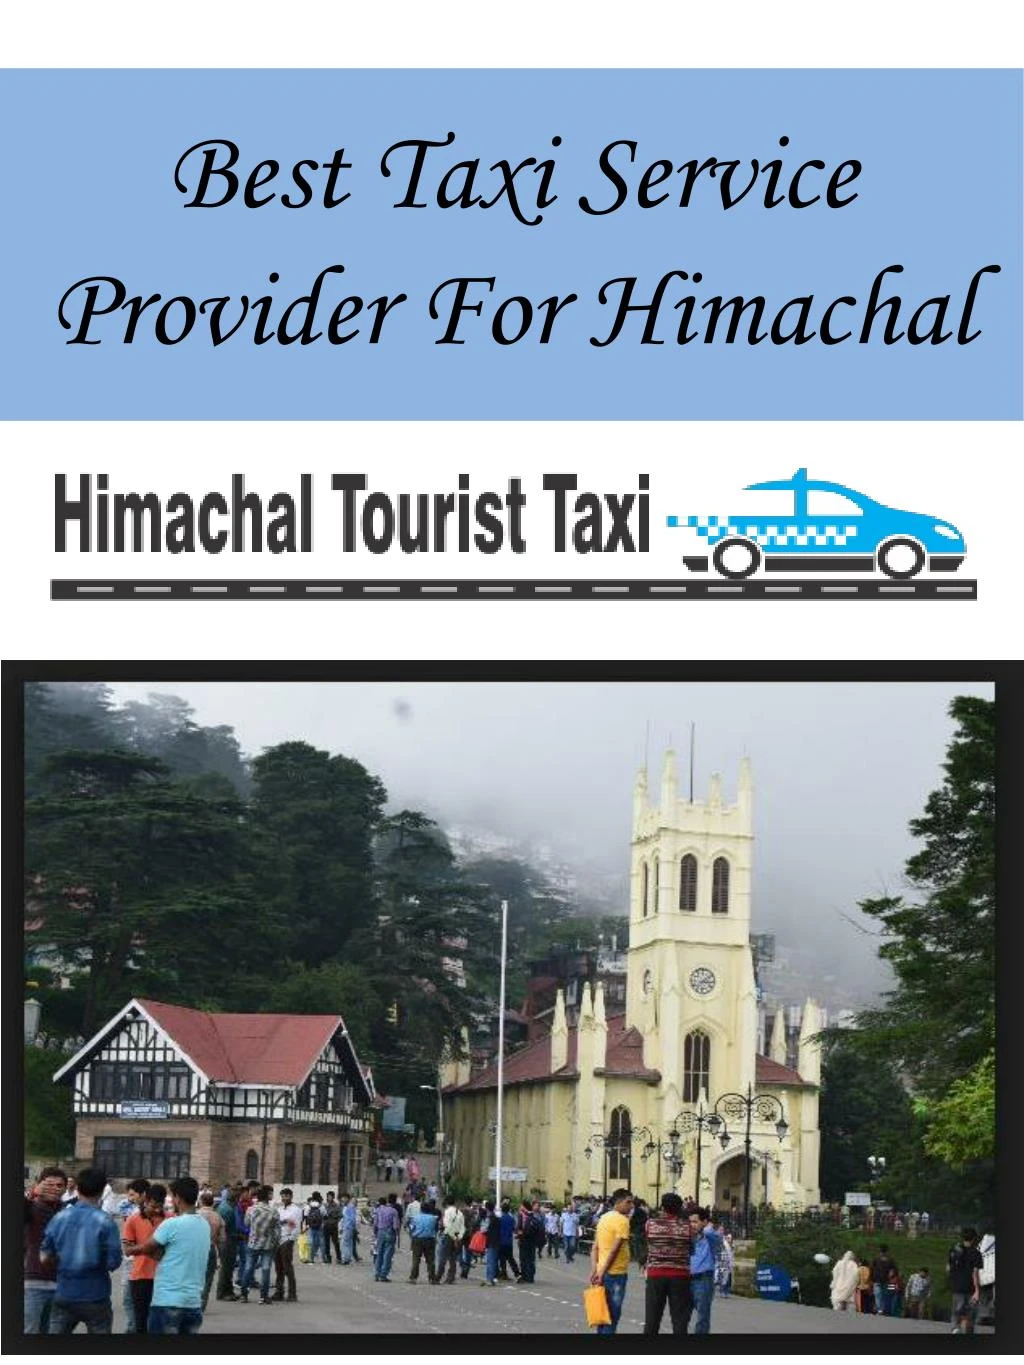 best taxi service provider for himachal